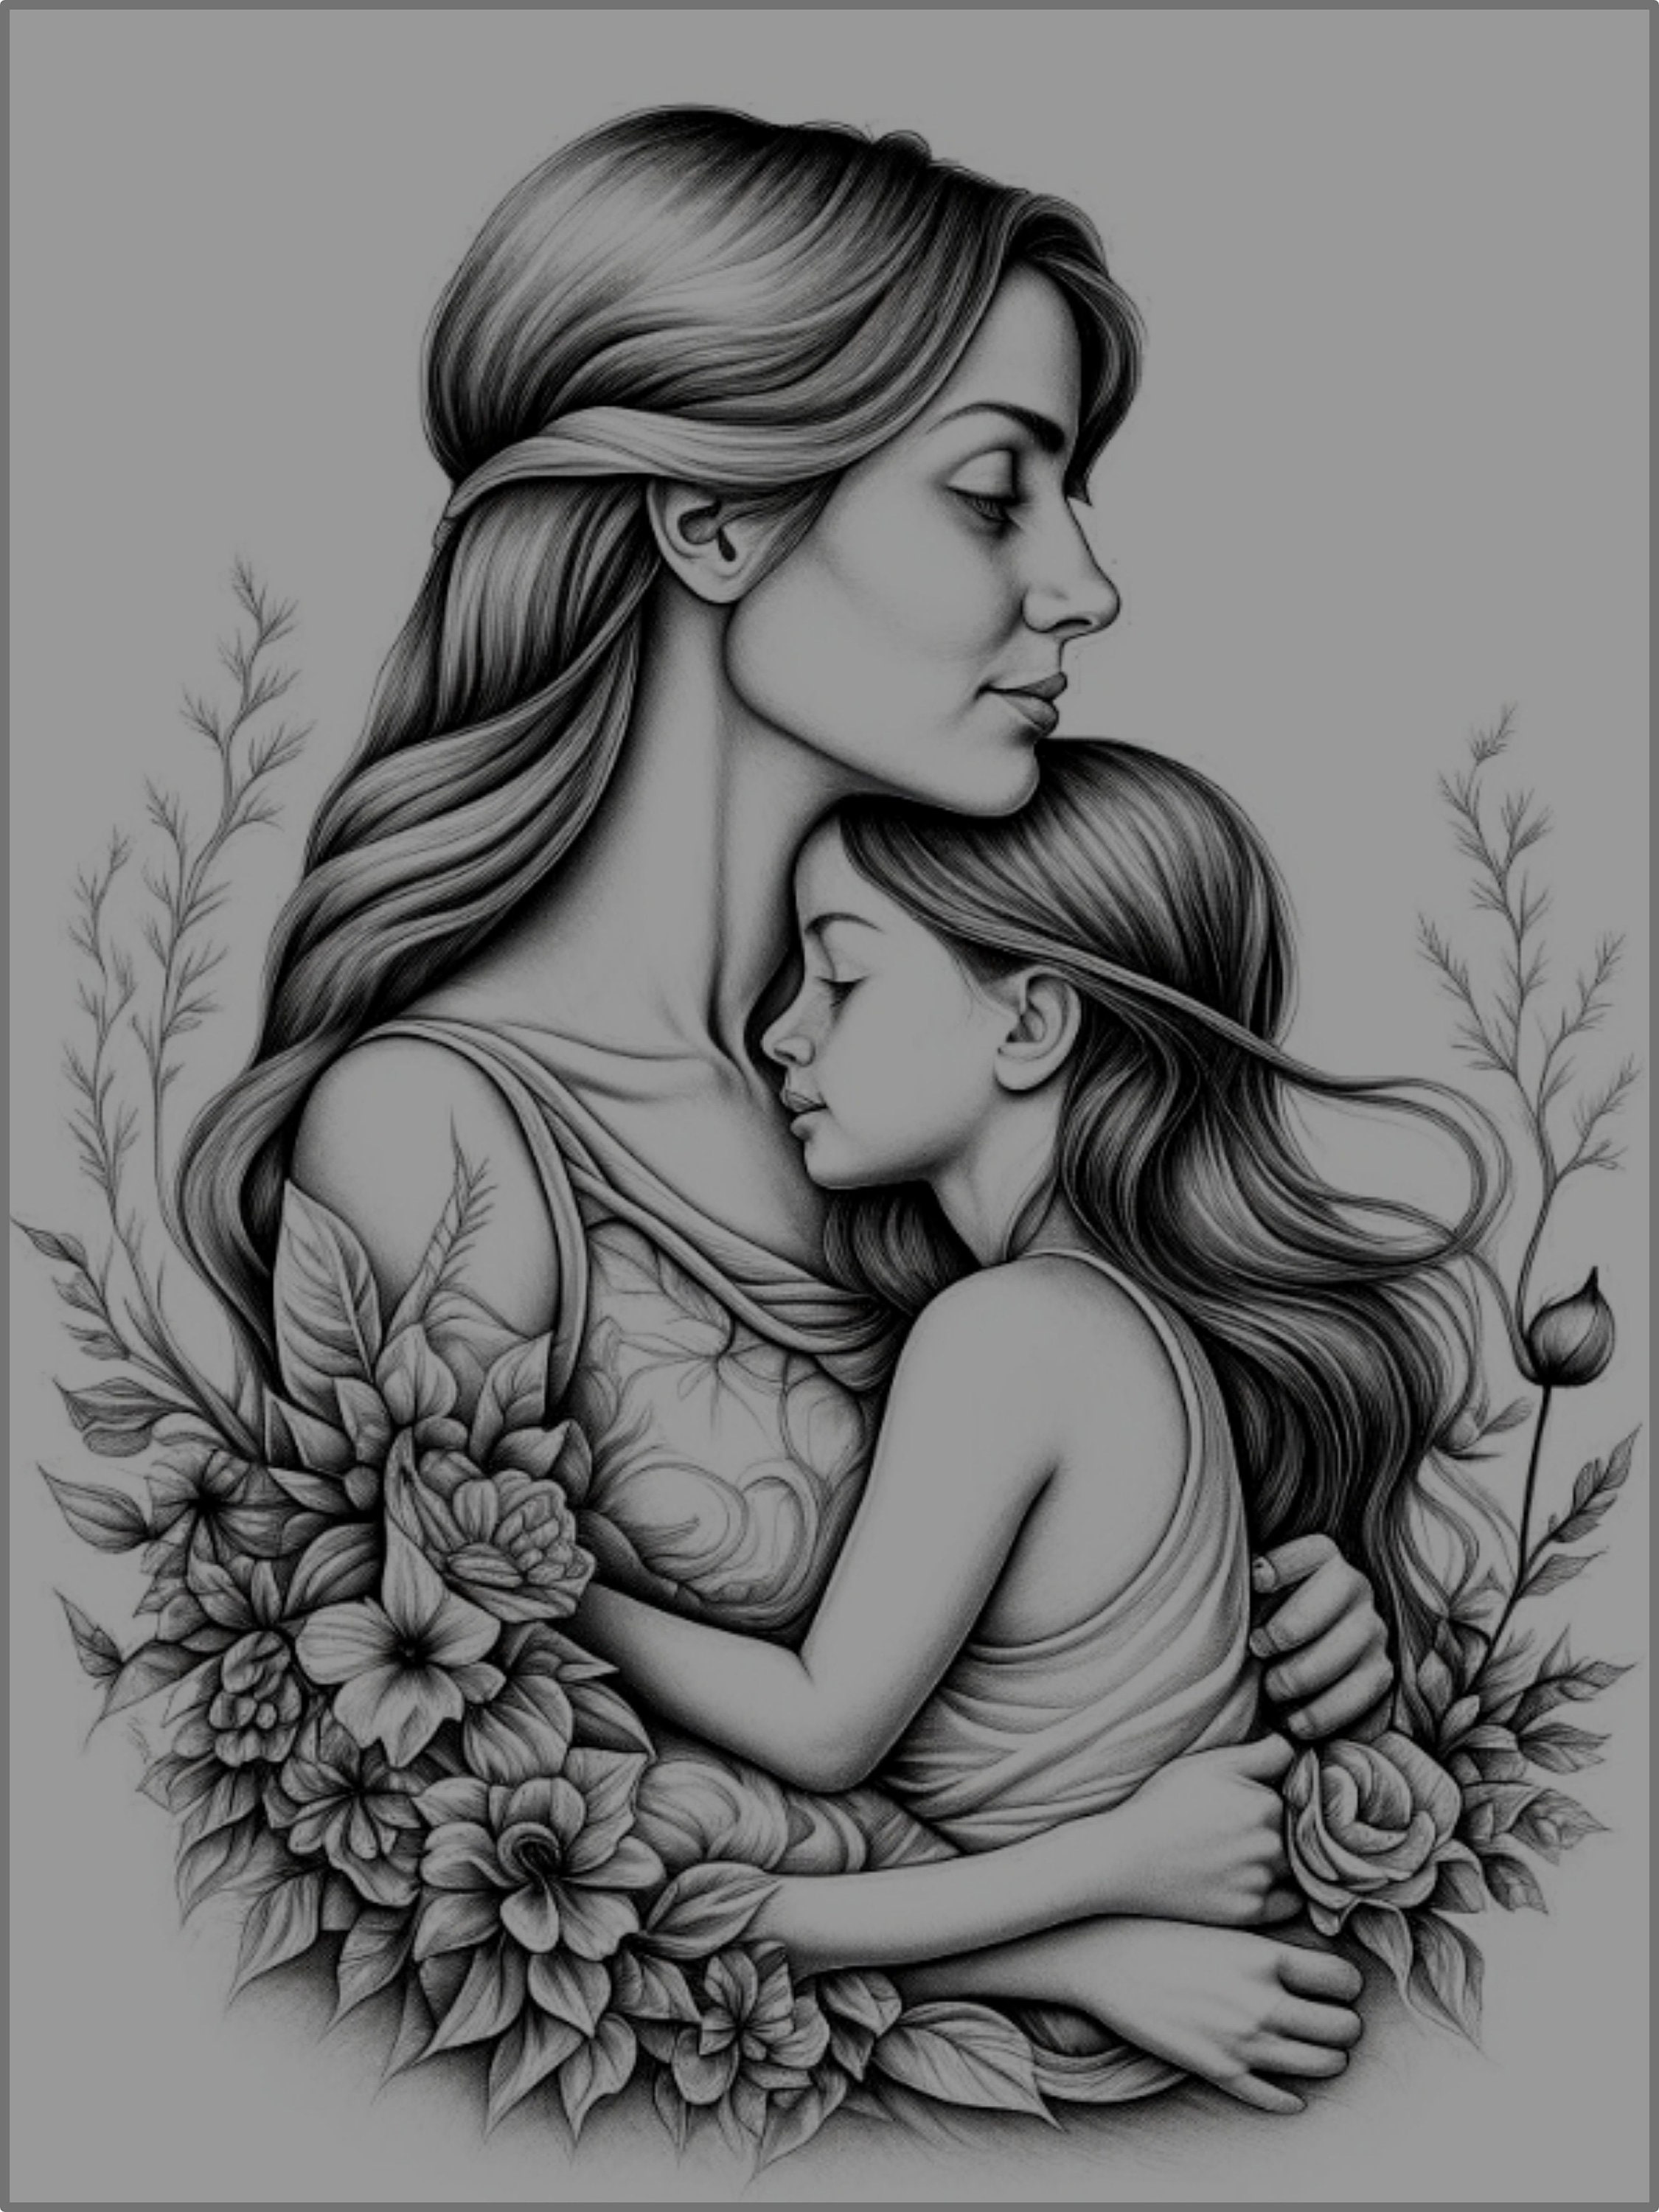 Indian Mother Daughter: Over 1,125 Royalty-Free Licensable Stock  Illustrations & Drawings | Shutterstock